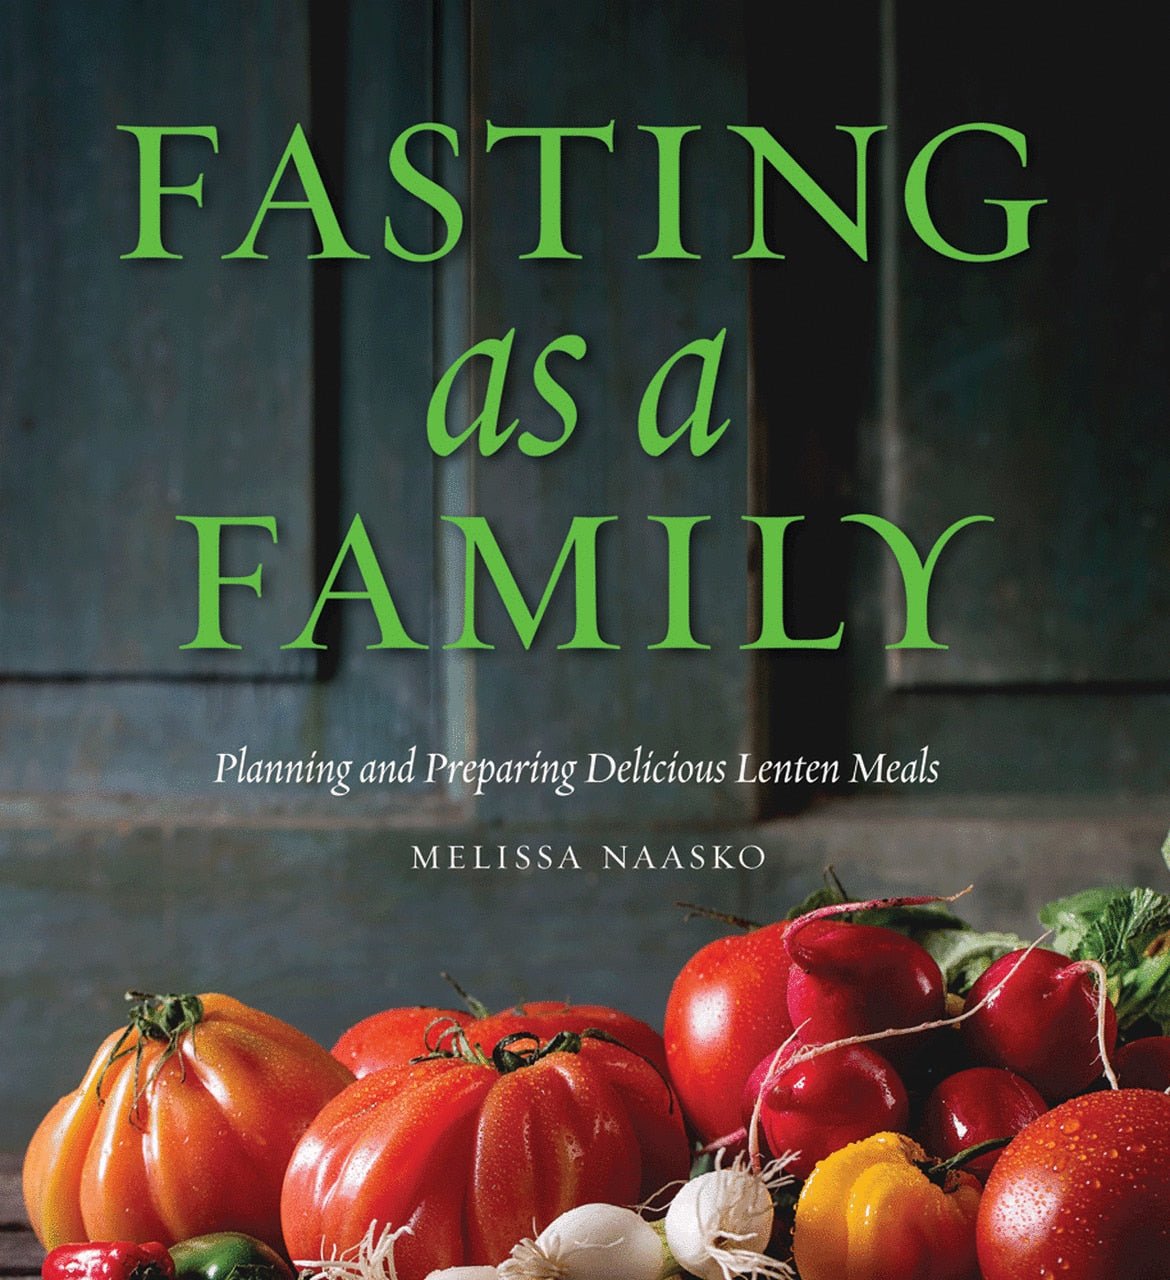 Fasting as a Family - Planning and Preparing Delicious Lenten Meals - Holy Cross Monastery